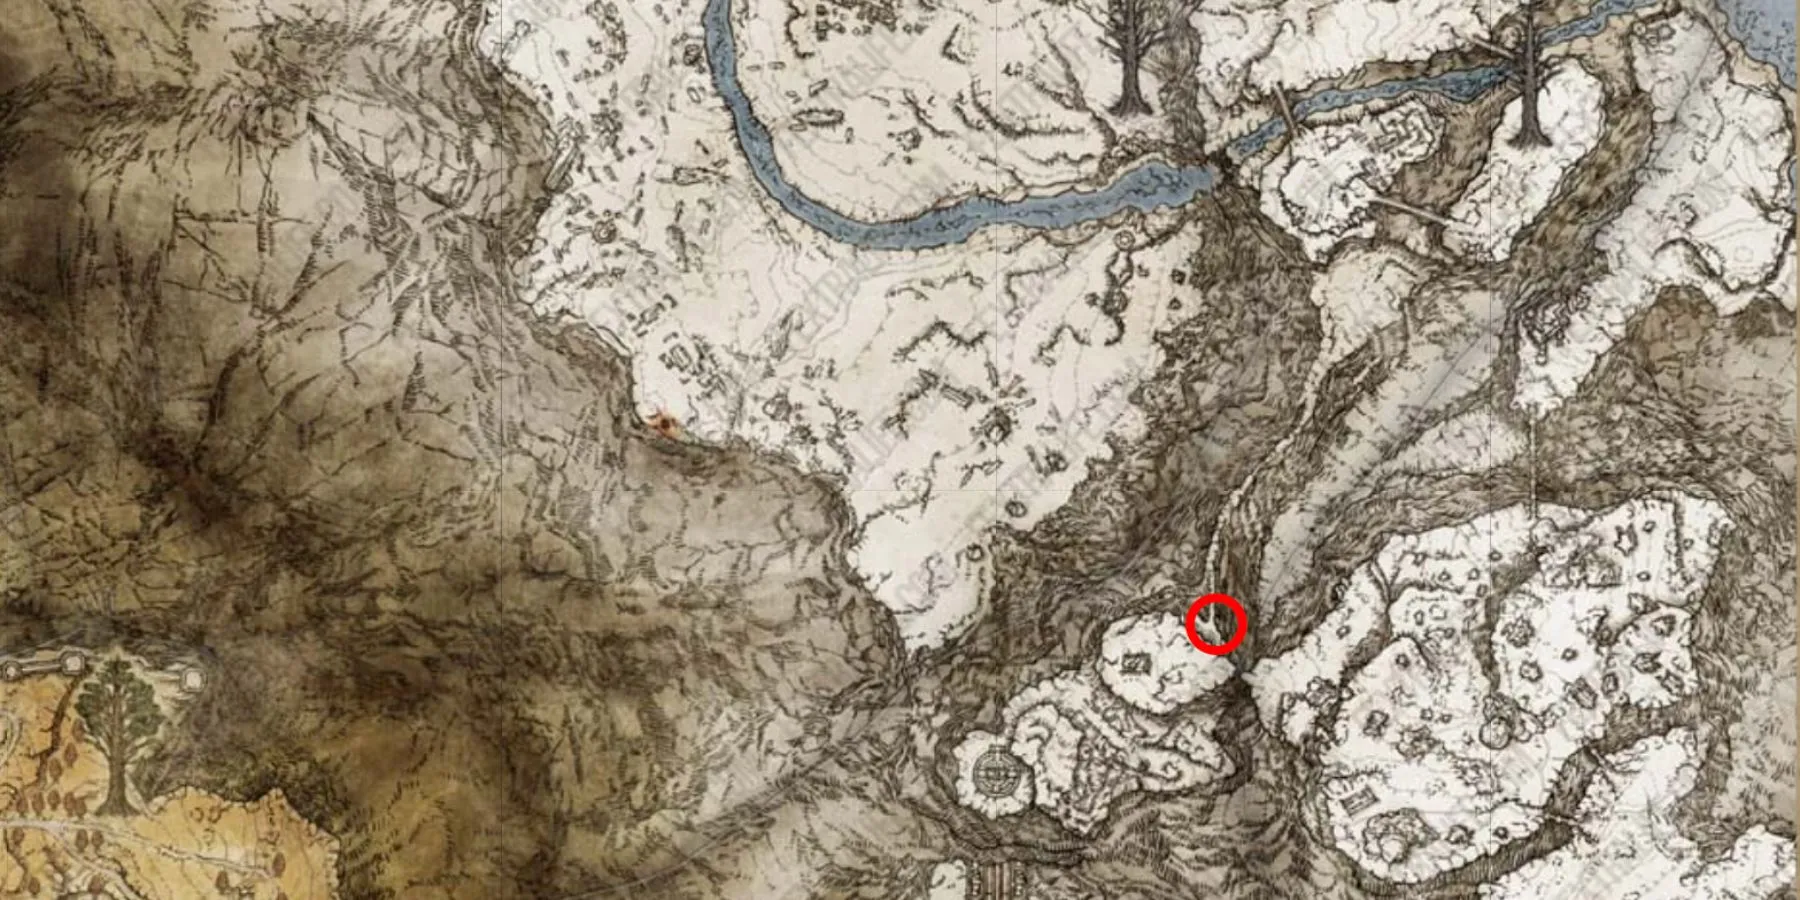 Fire Prelate location on the map in Elden Ring